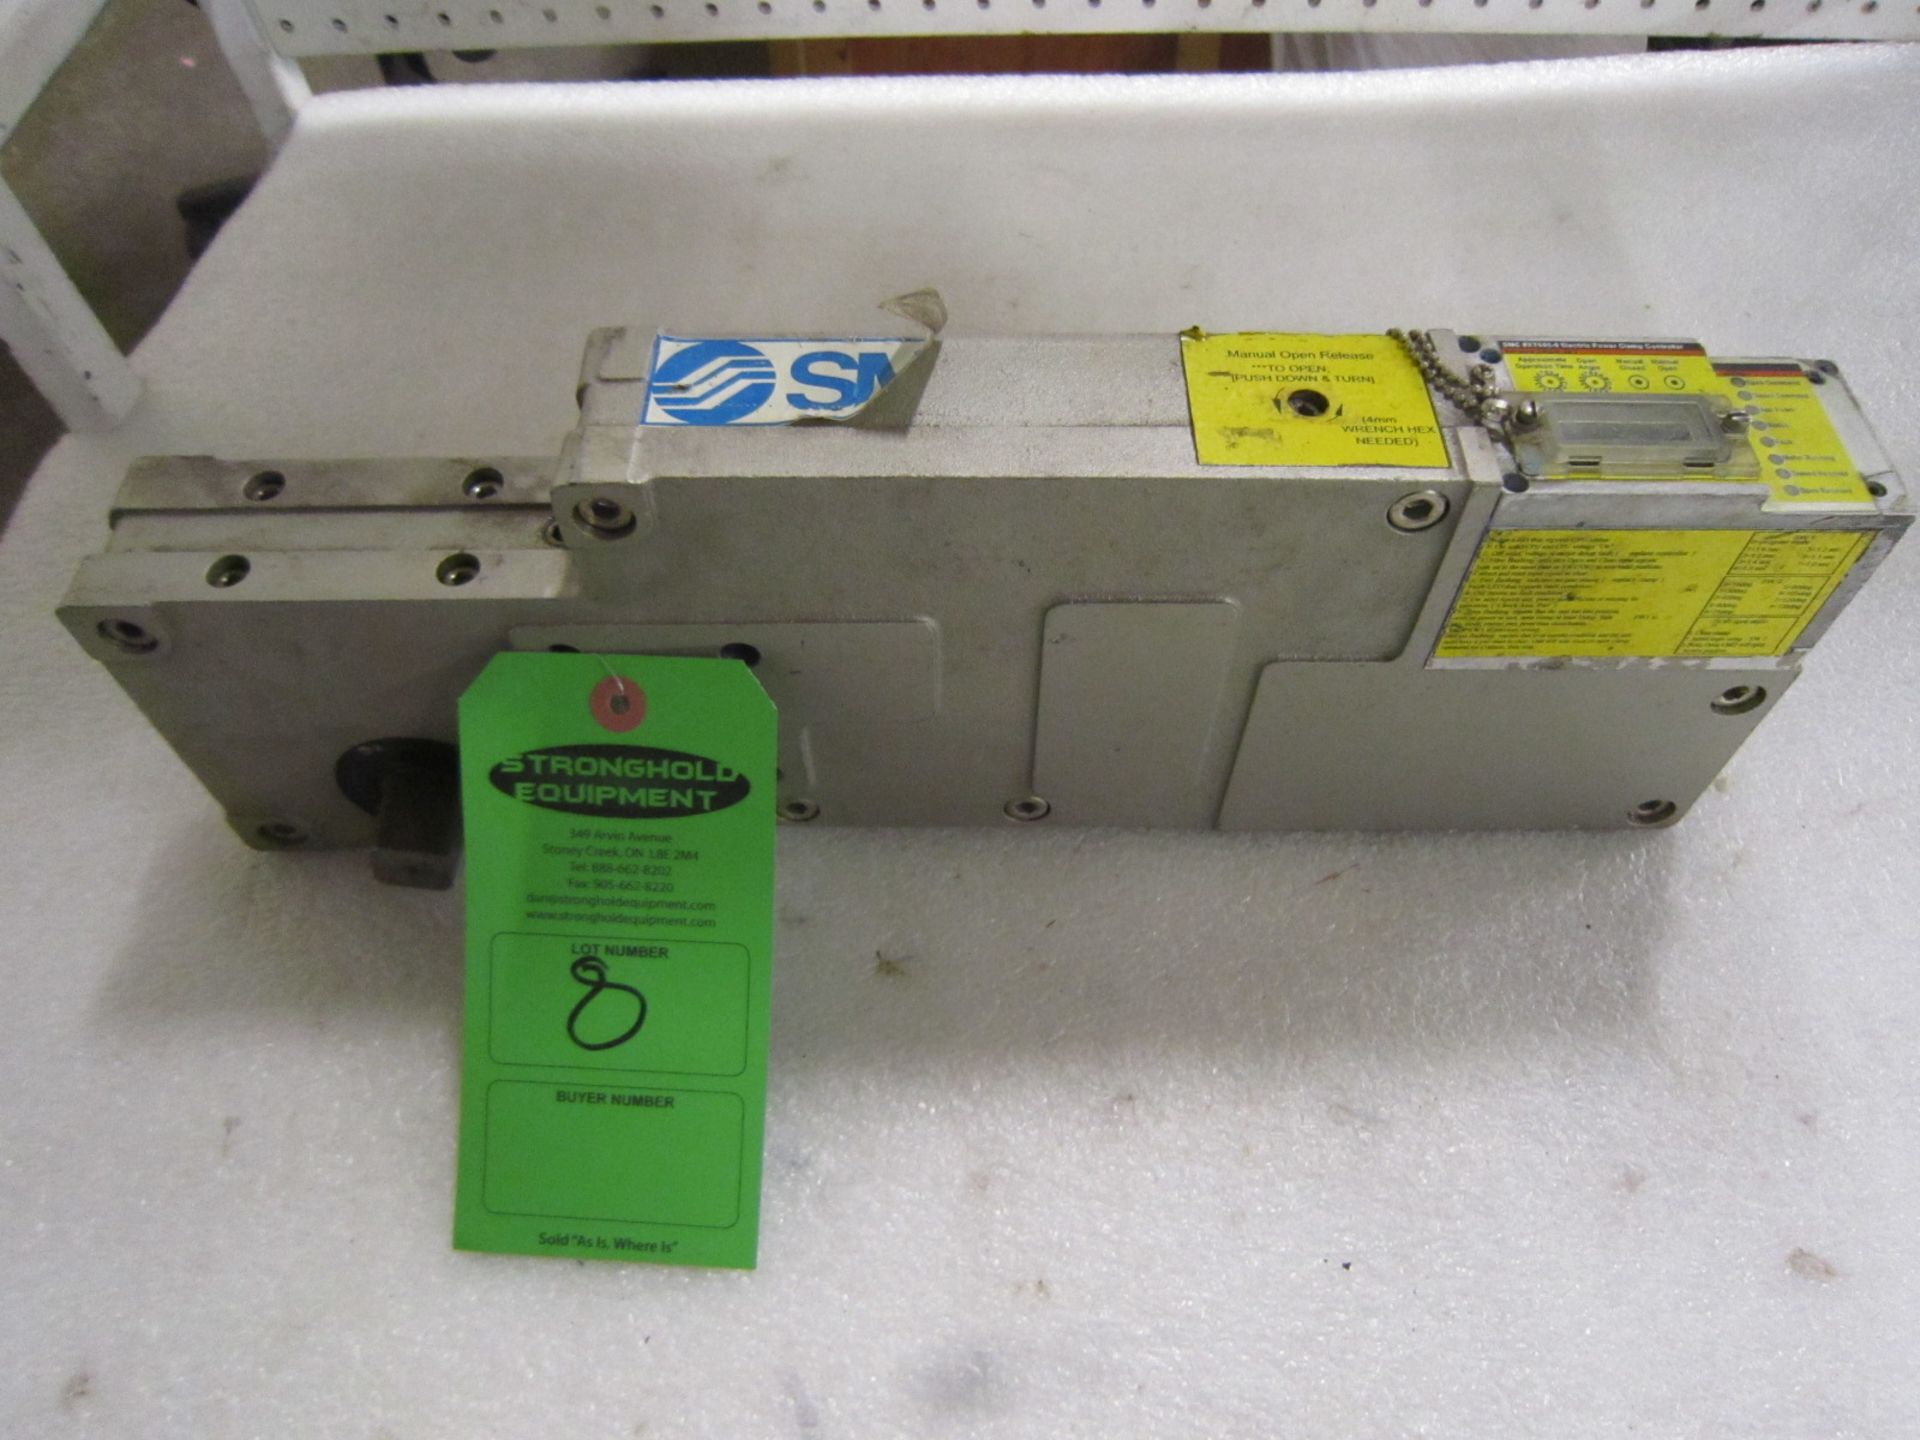 SMC Electric Power Clamp Controller Model XT580-9 with 1" drive